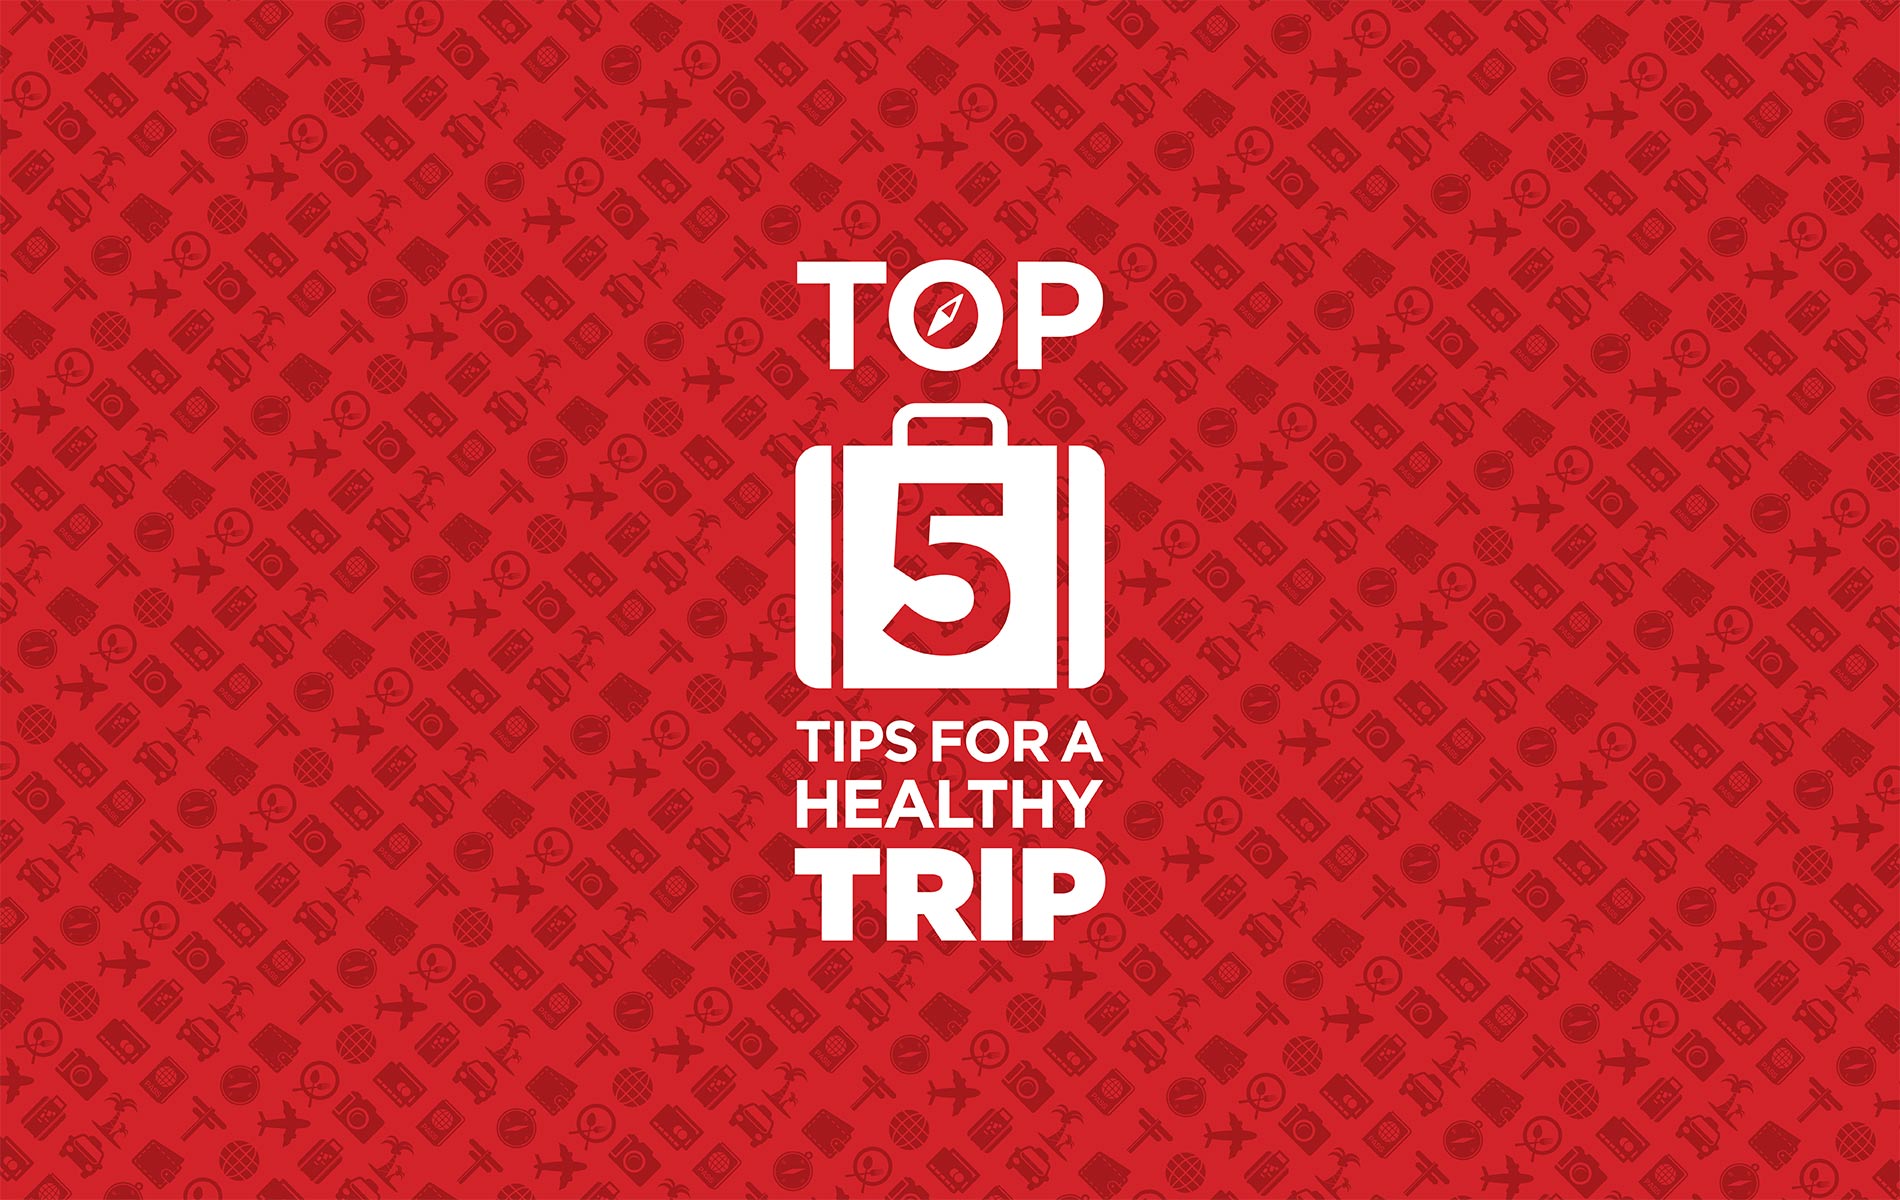 Top Five Tips for a Healthy Trip